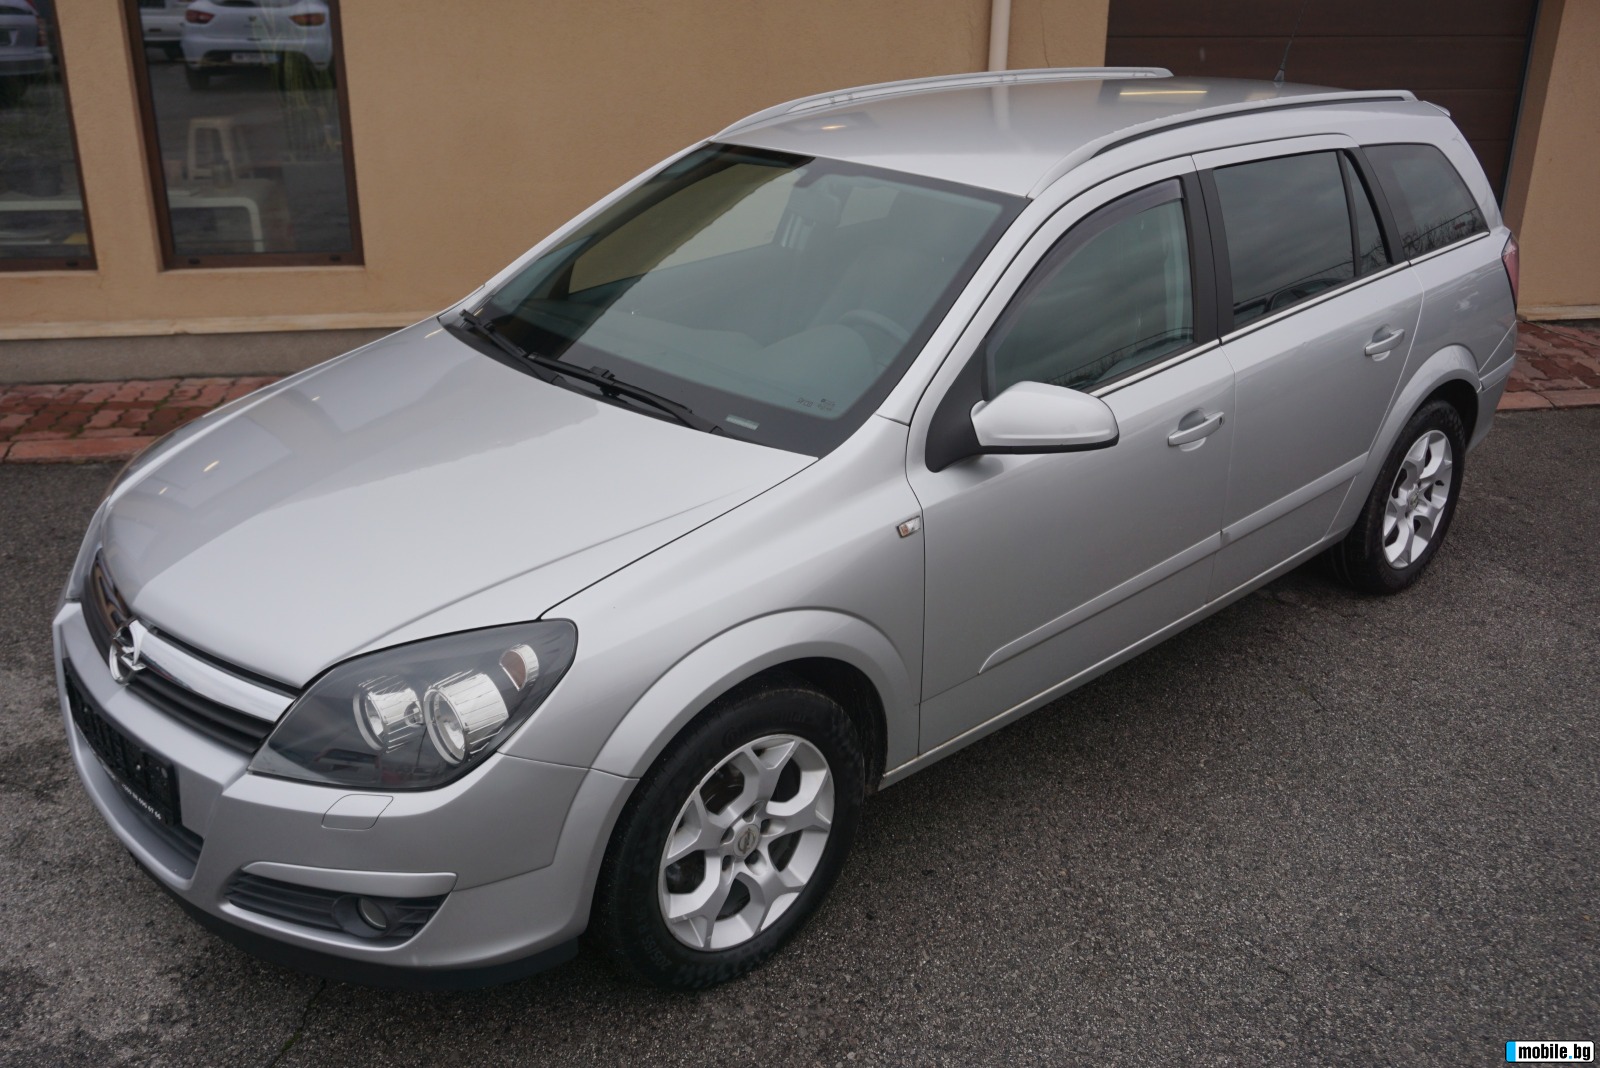 Opel Astra 1.6i TWINPORT COSMO | Mobile.bg   1